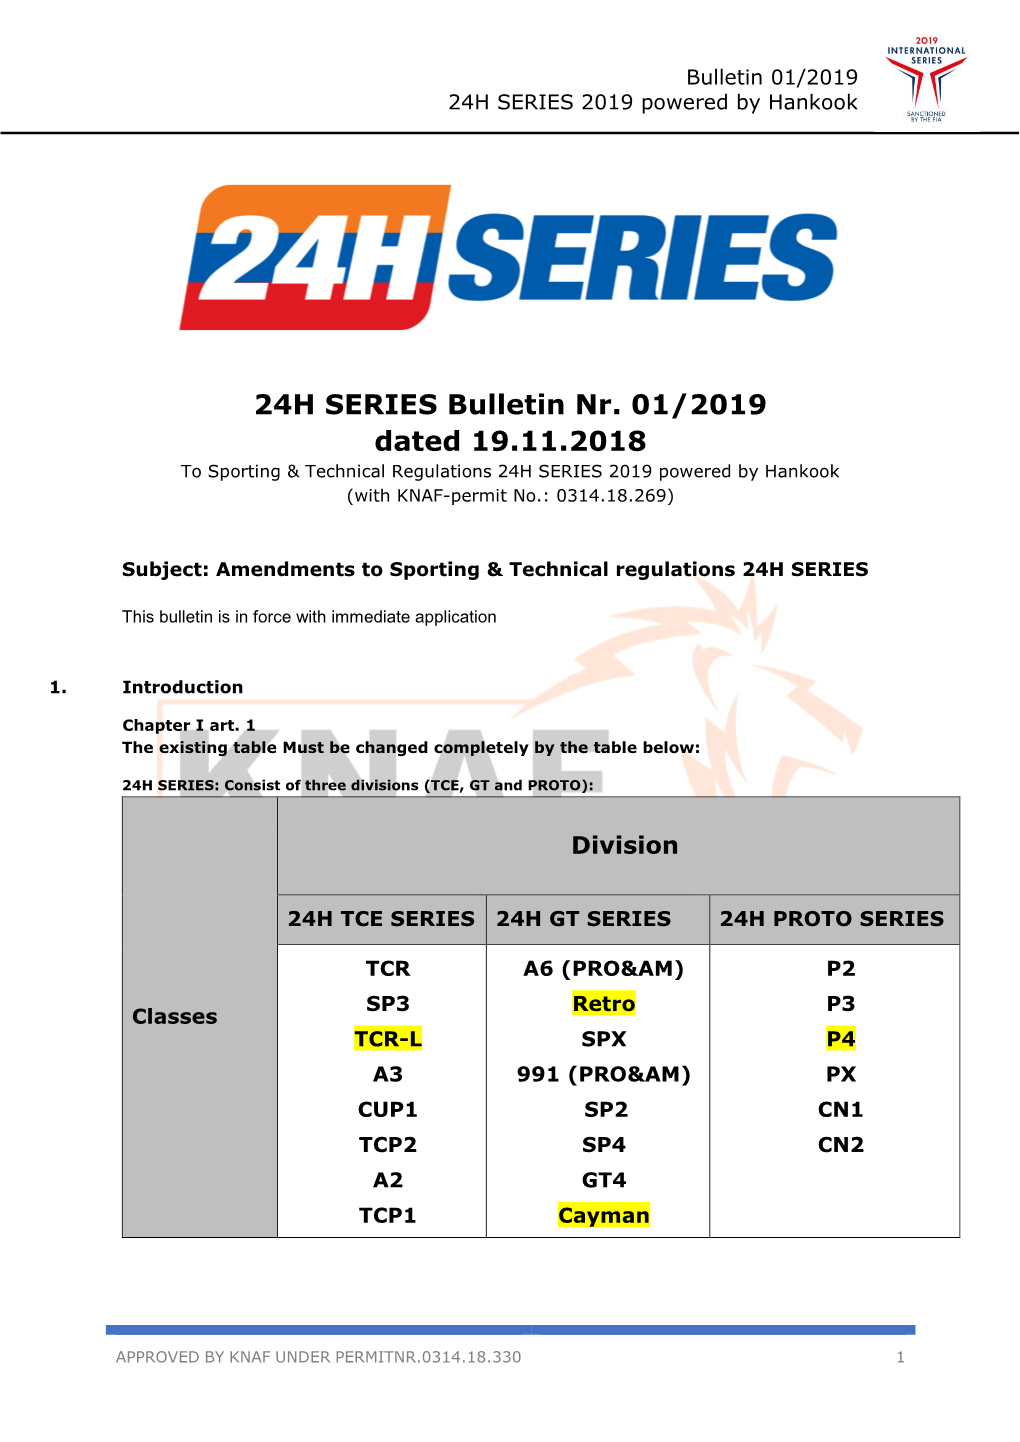 24H SERIES Bulletin Nr. 01/2019 Dated 19.11.2018 to Sporting & Technical Regulations 24H SERIES 2019 Powered by Hankook (With KNAF-Permit No.: 0314.18.269)